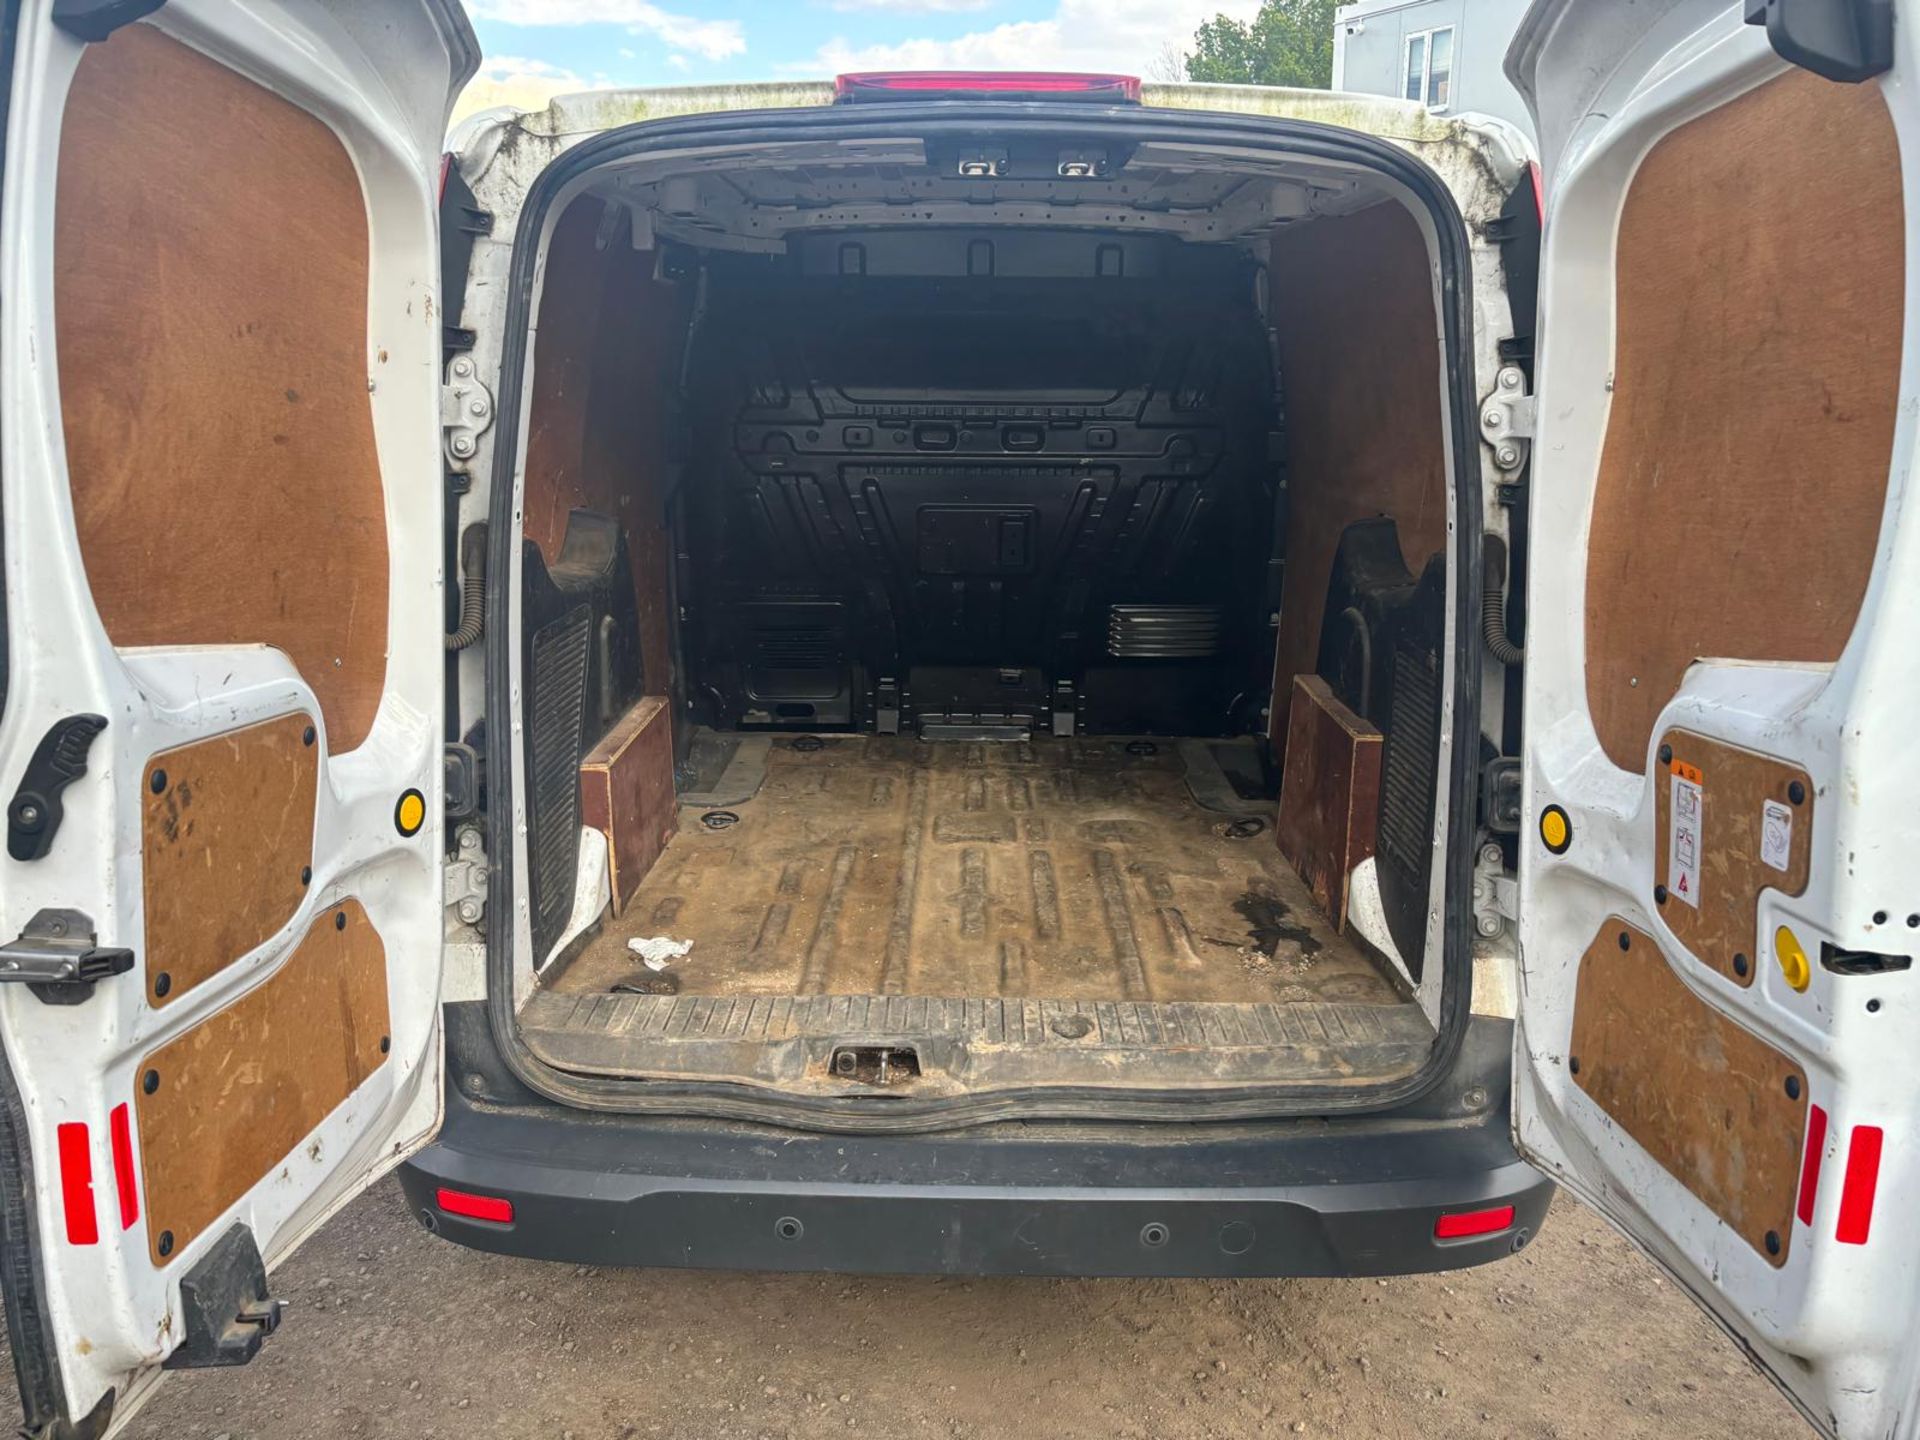 2018 18 FORD TRANSIT CONNECT LIMITED PANEL VAN - 75K MILES - EURO 6 - AIR CON - ALLOY WHEELS  - Image 11 of 12